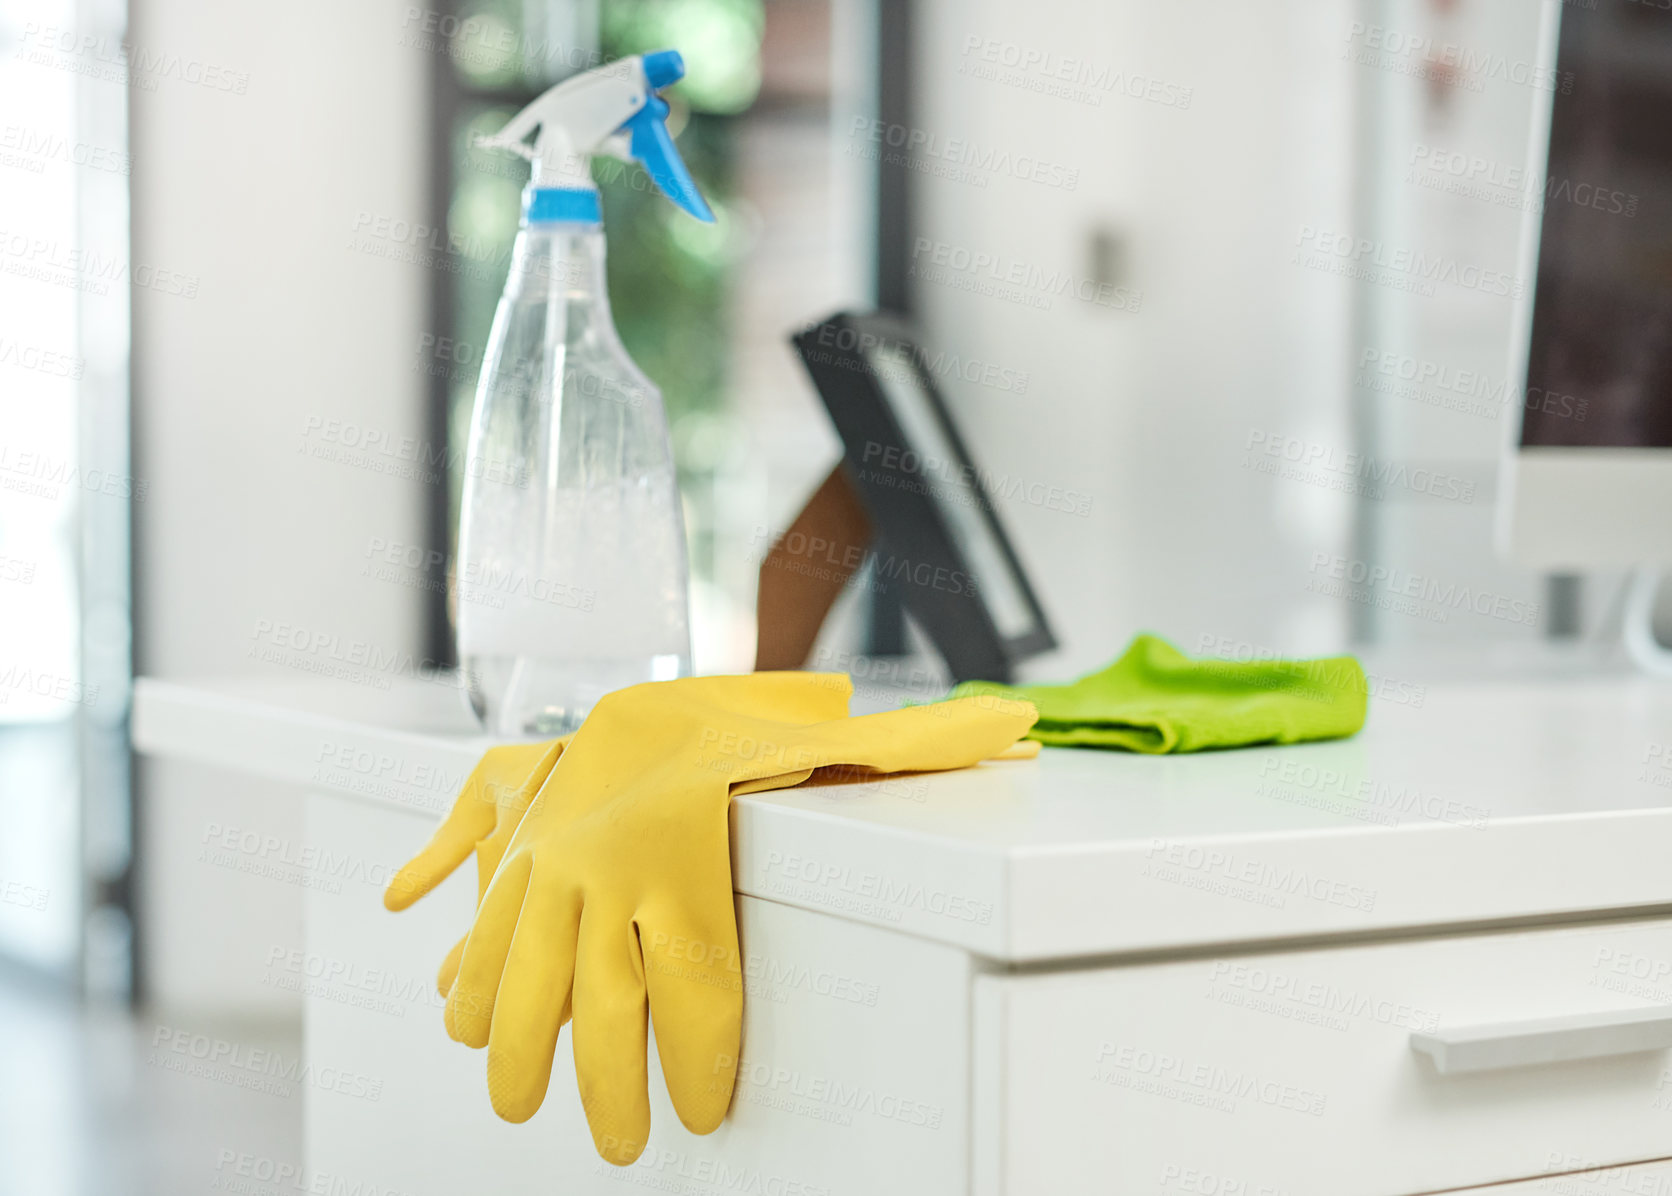 Buy stock photo Shot of a pair of rubber gloves and disinfectant spray on a desk in a modern office